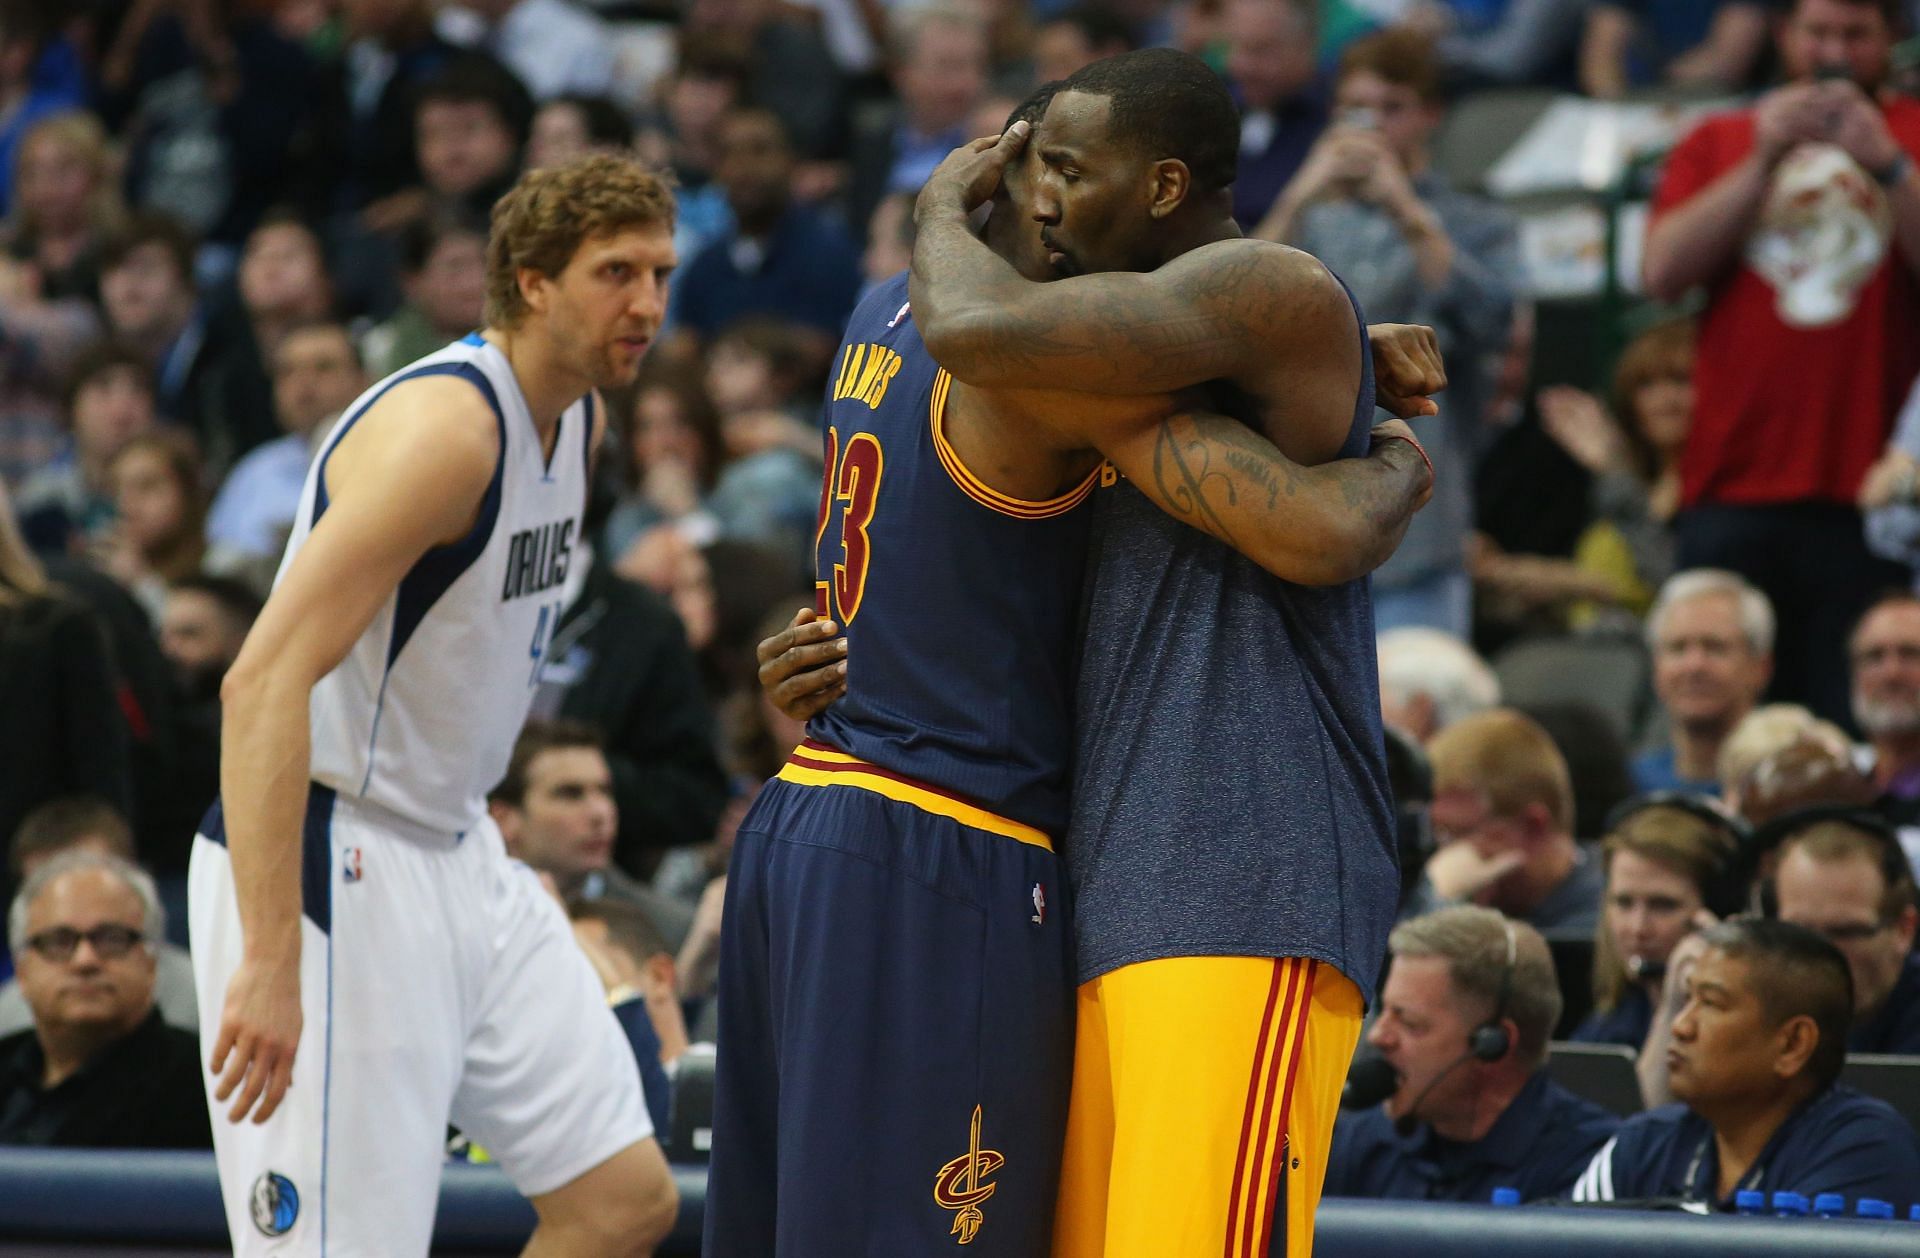 Cleveland Cavaliers players LeBron James, left, and Kendrick Perkins